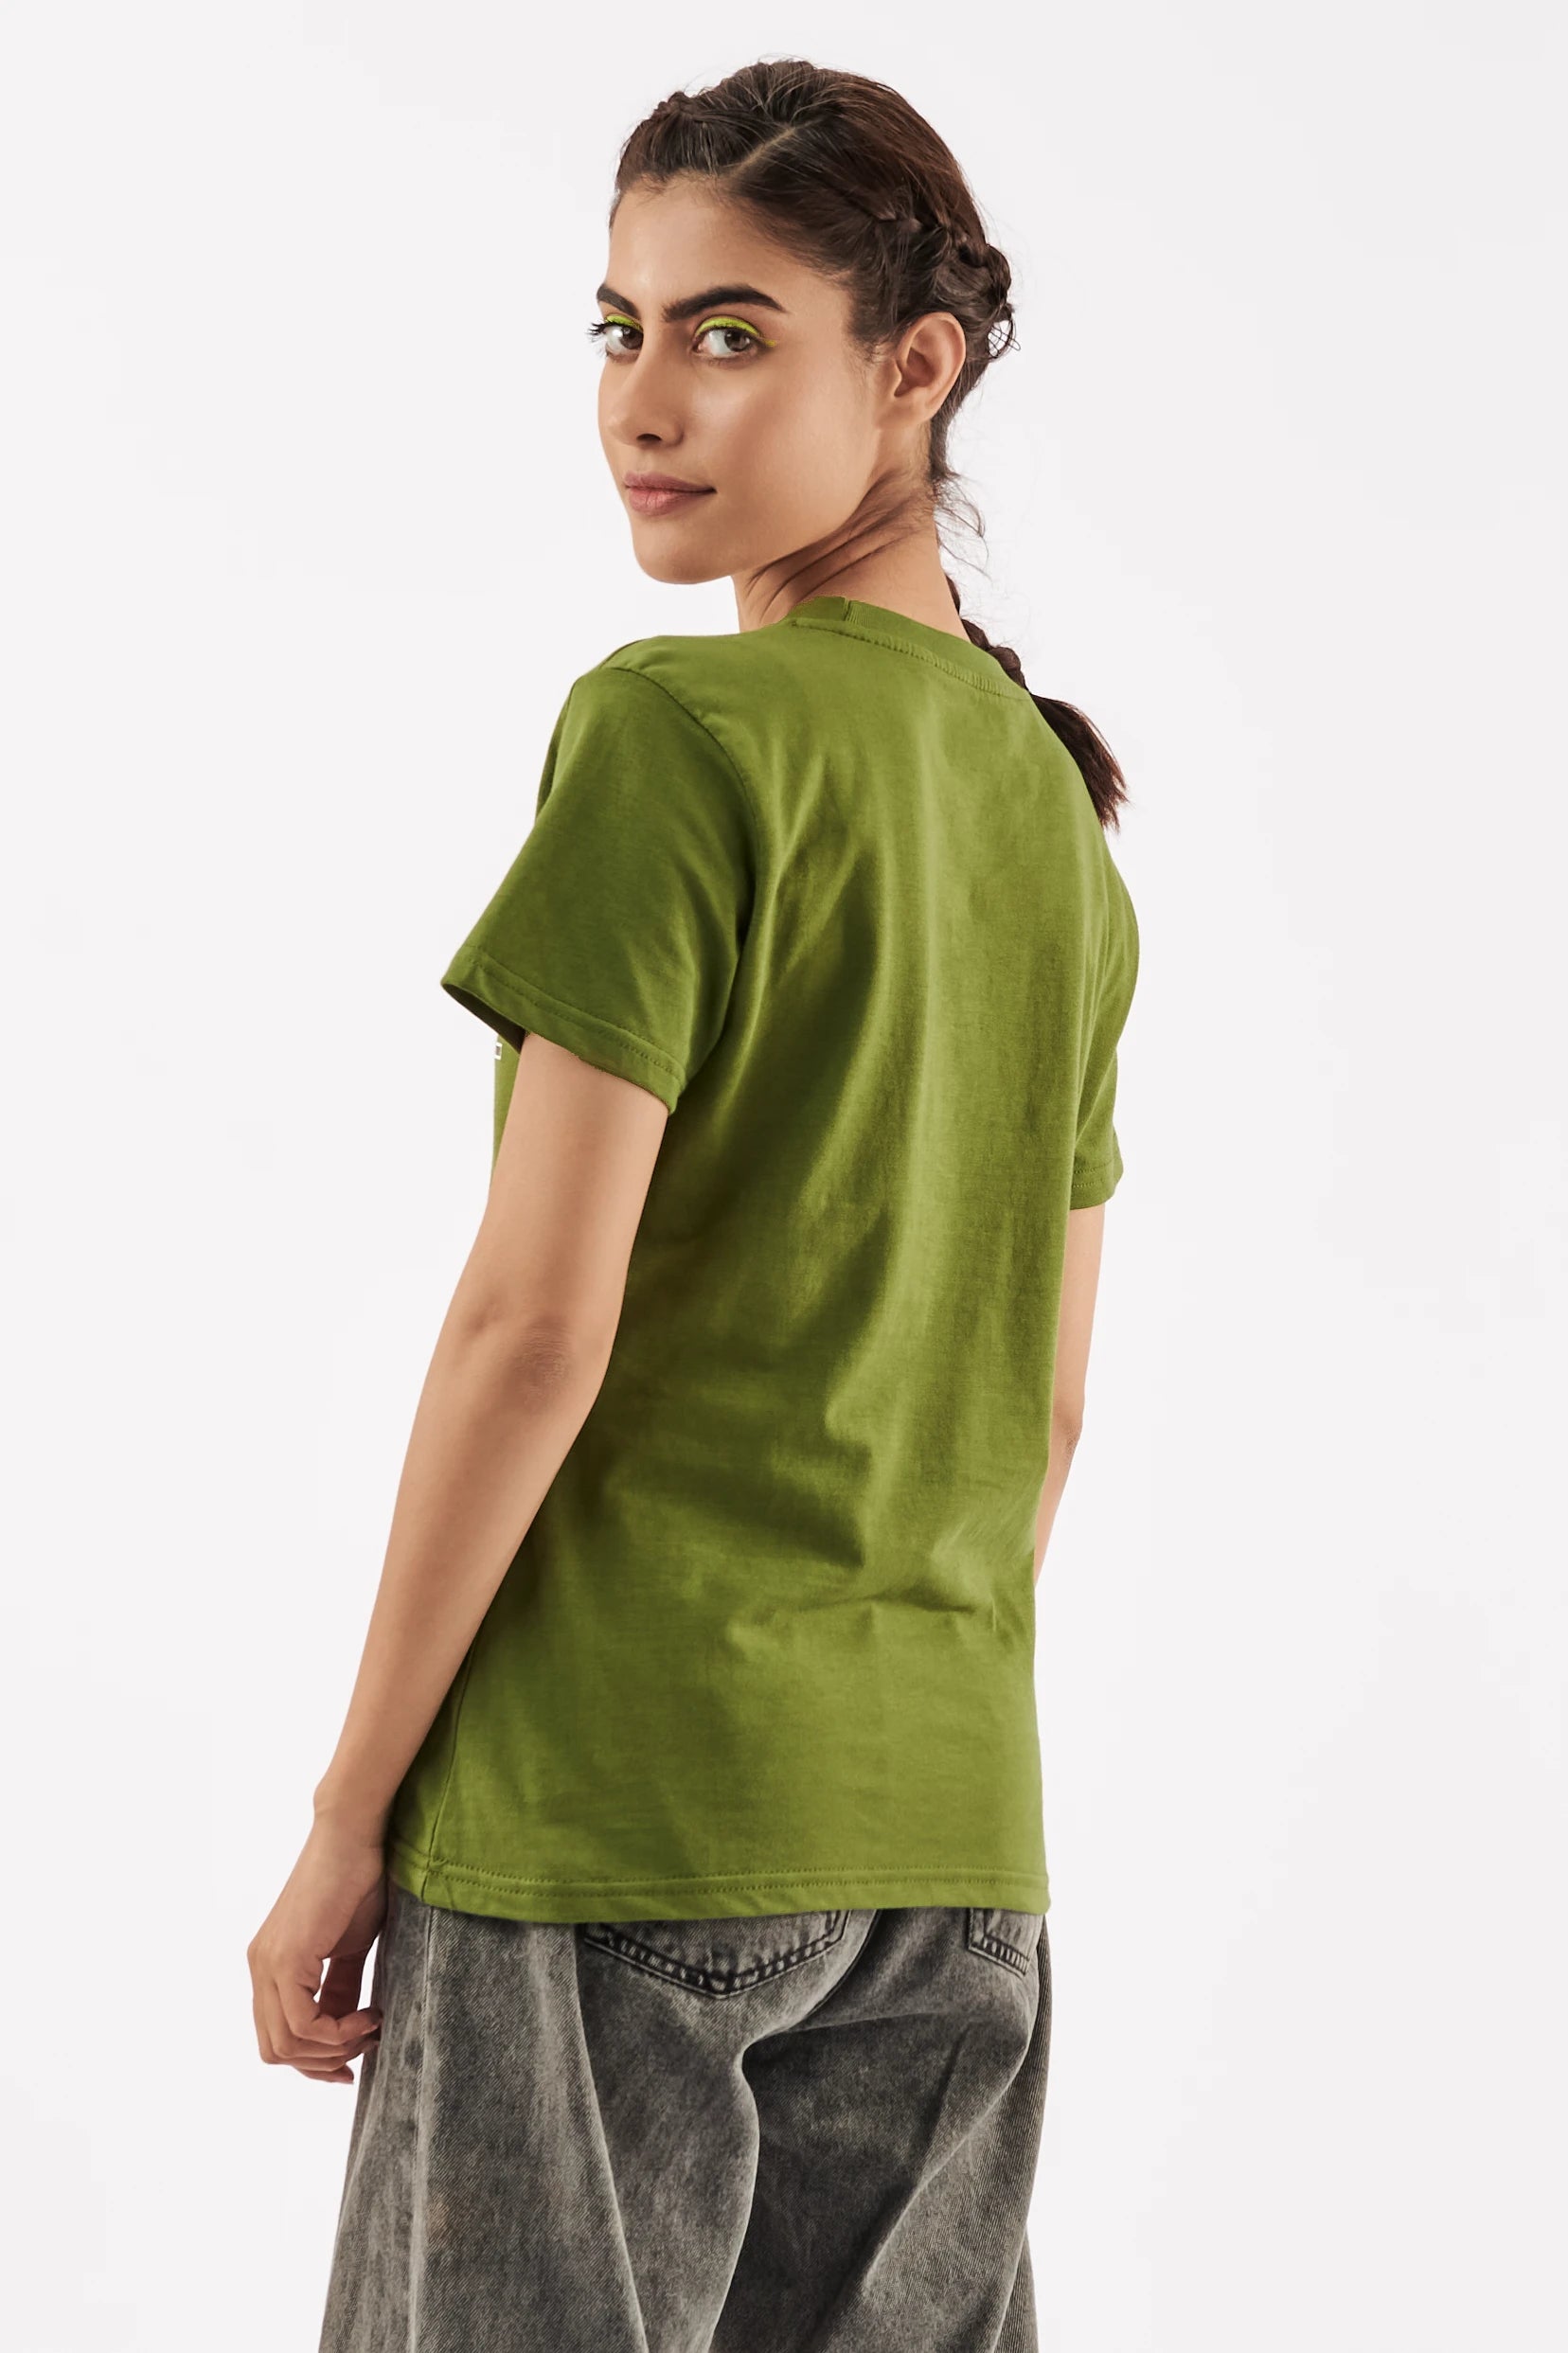 Women's Empowering T-Shirt Olive Green